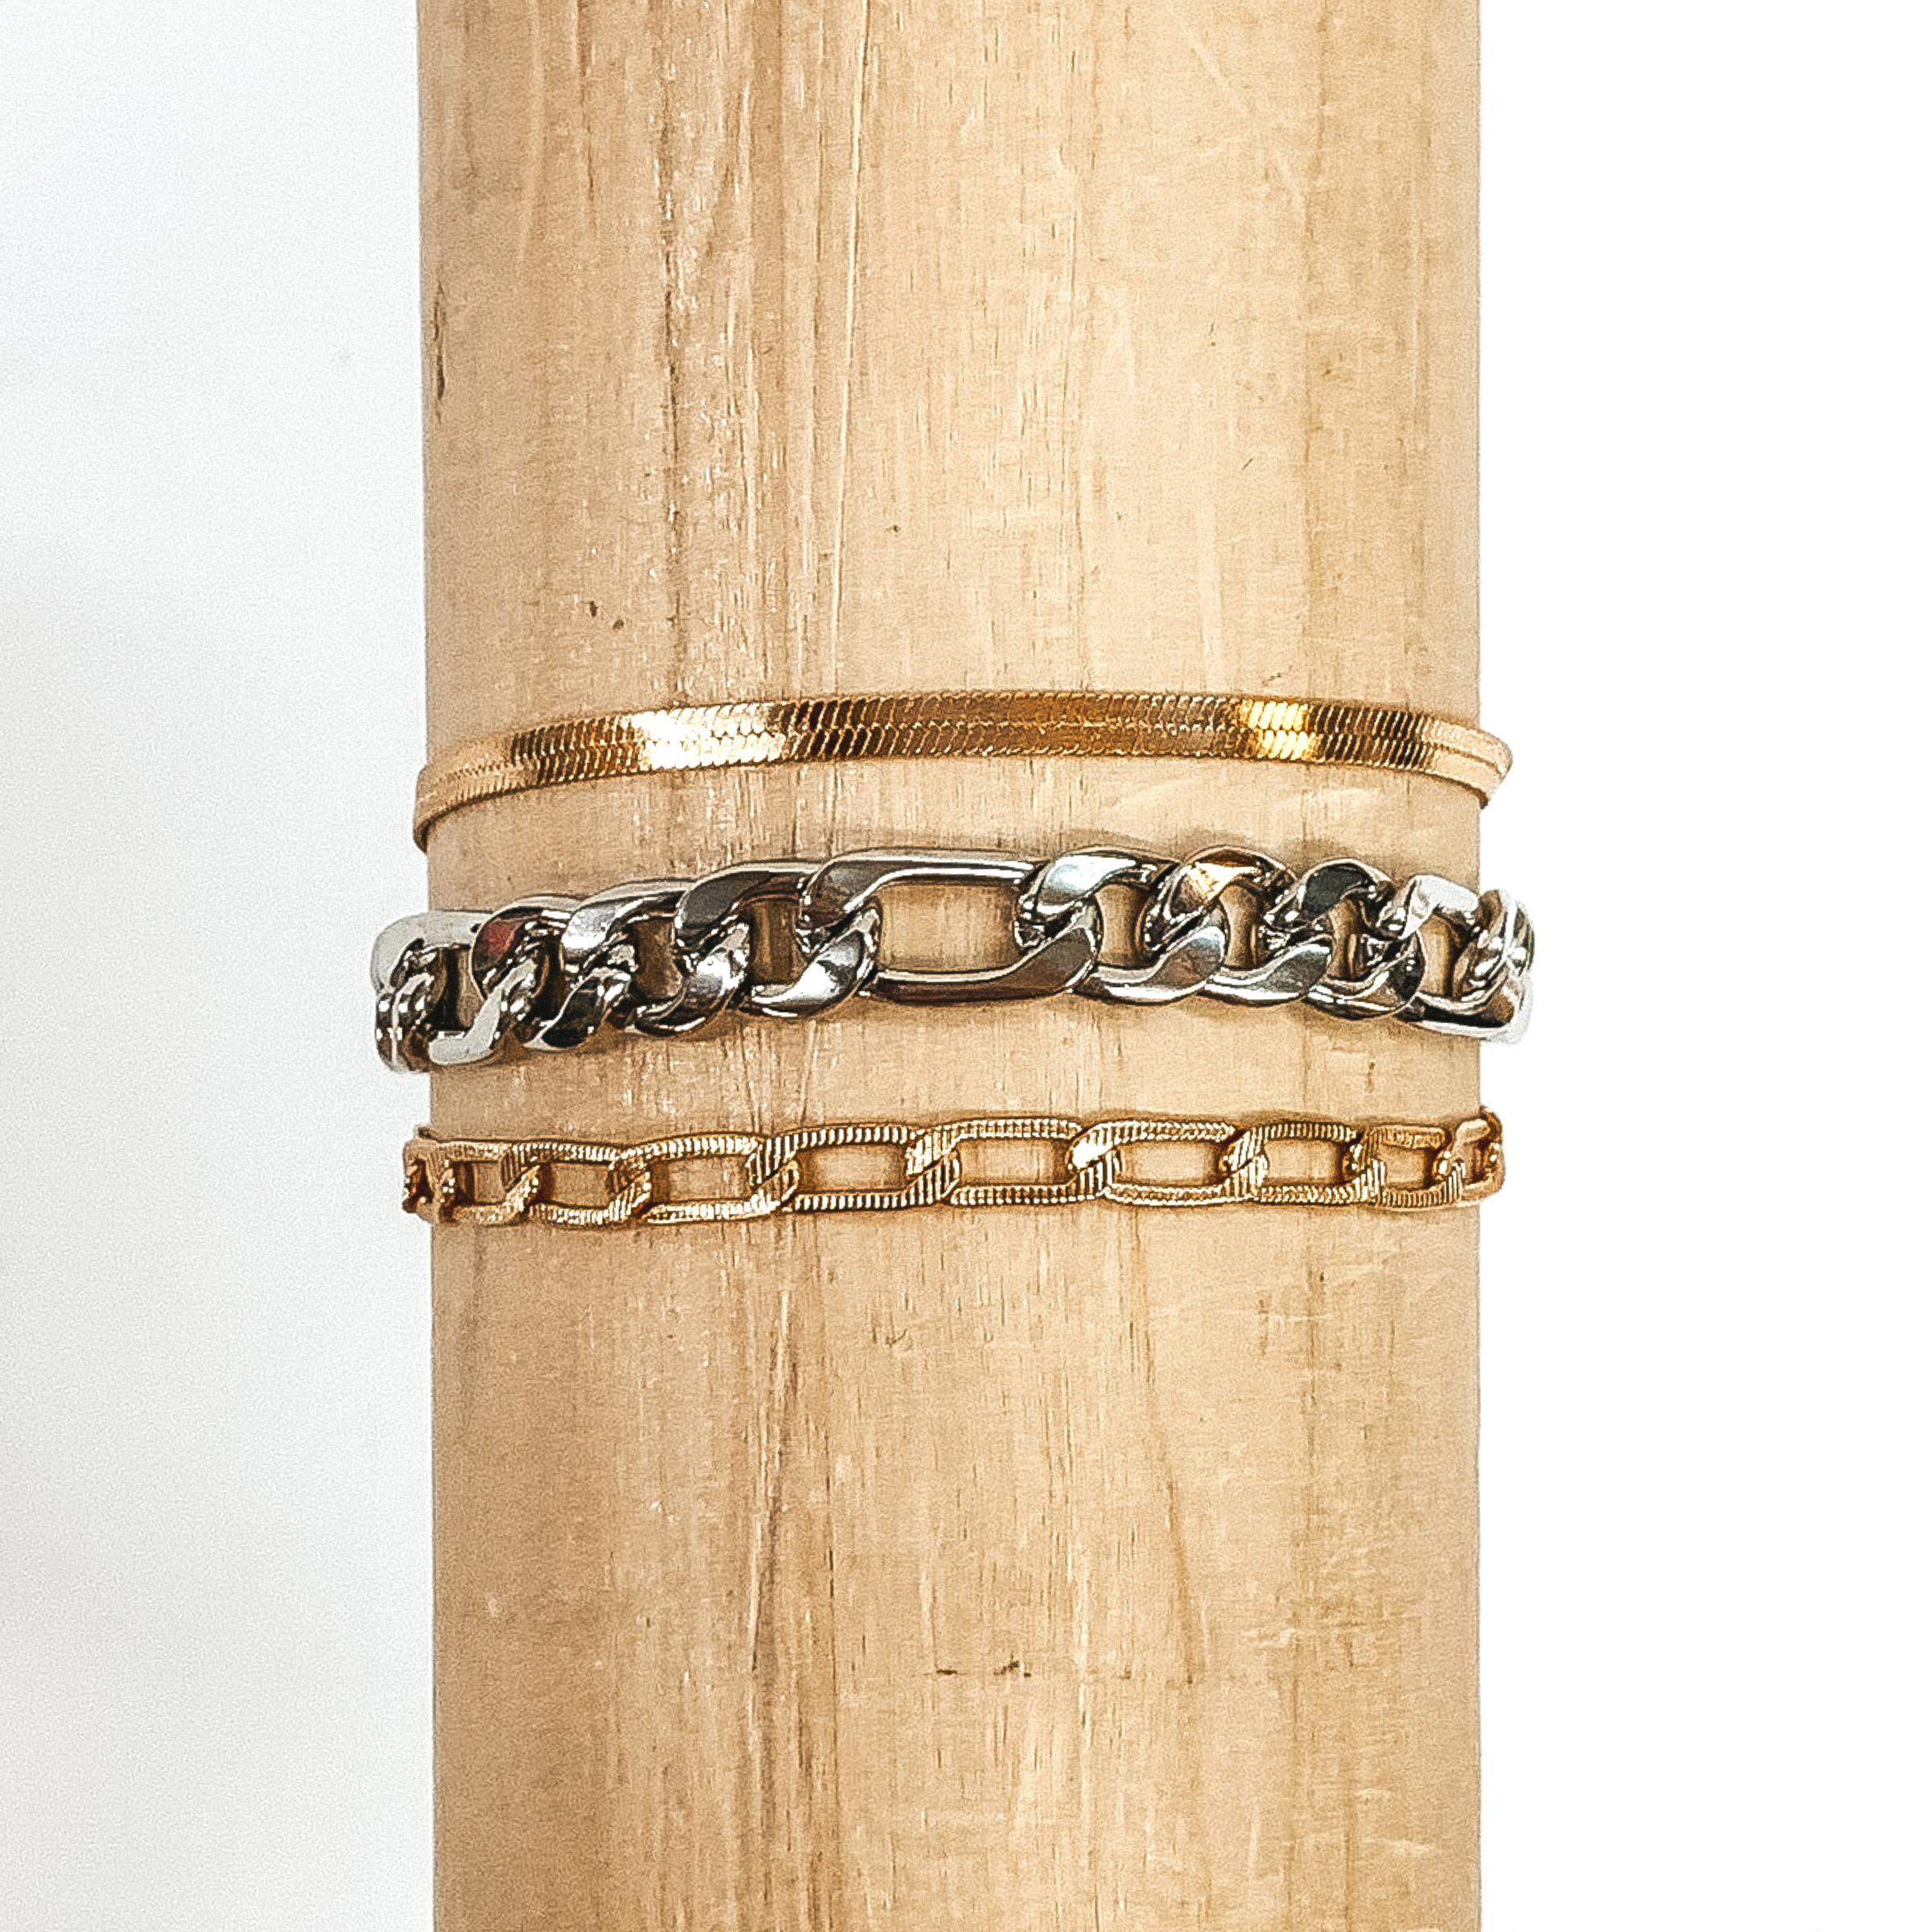 This bracelet includes a gold snake chain, a silver figaro chain, and a gold classic chain.. This bracelet is wrapped around a piece of wood that is pictured on a white background.